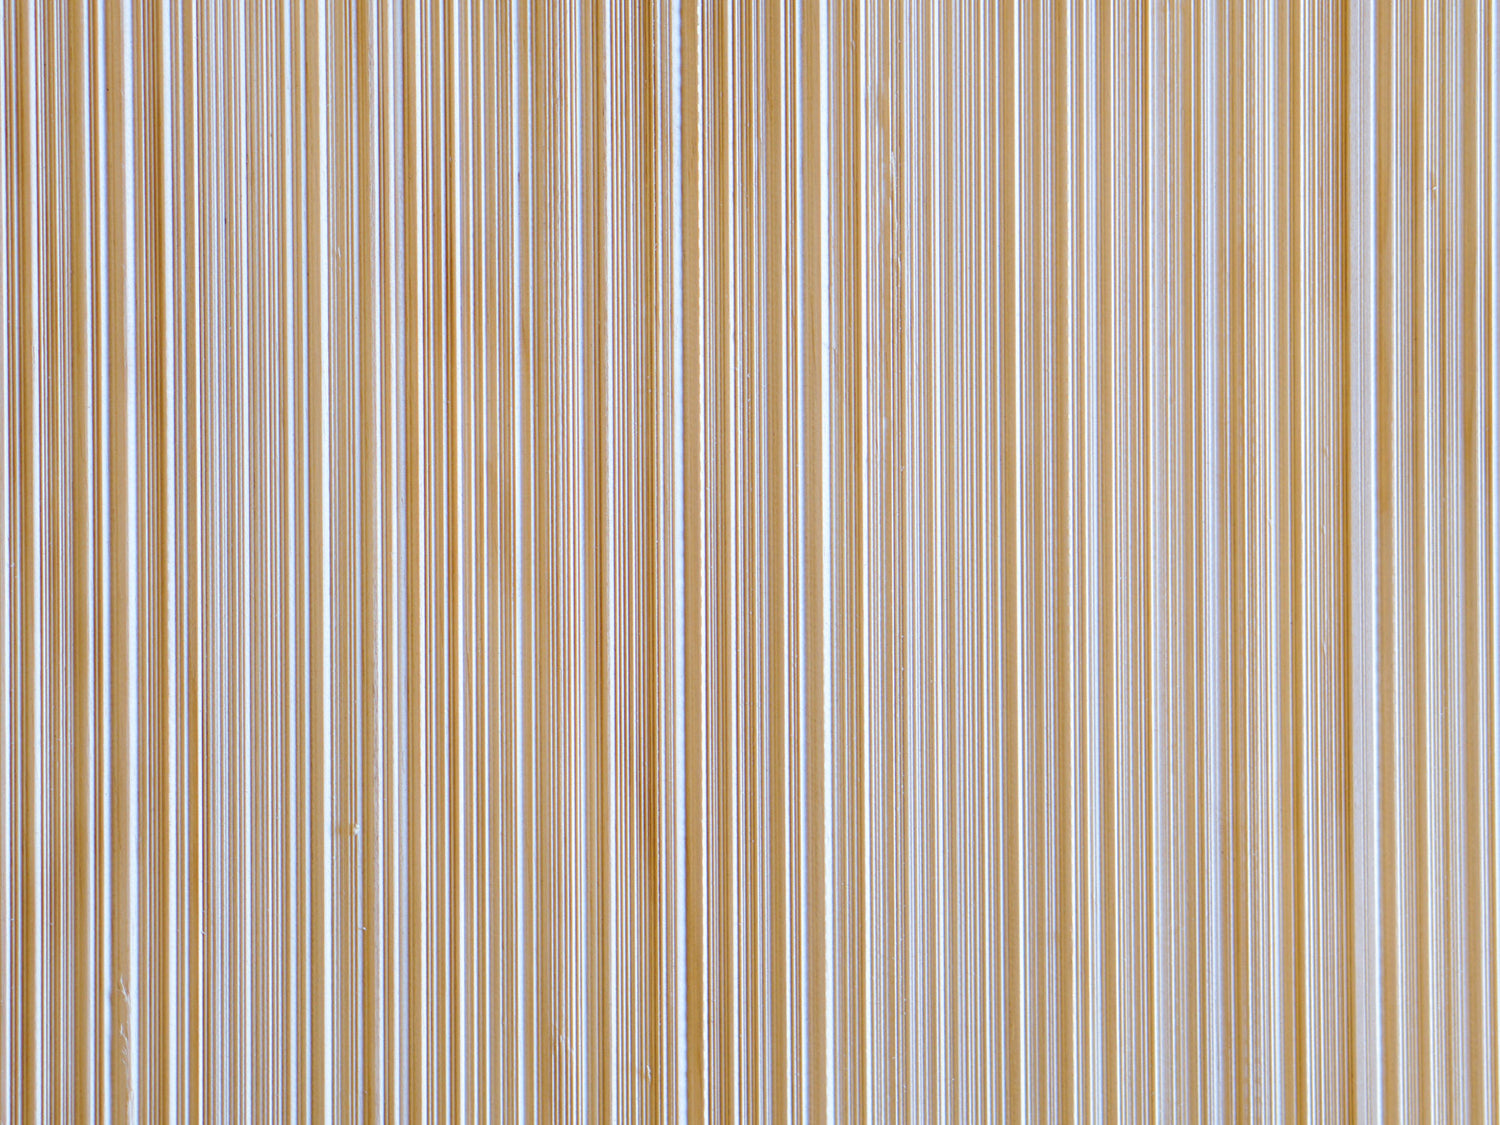 Close up of Vintage Plywood Millworks' Weldtex showing the combed, striated pattern